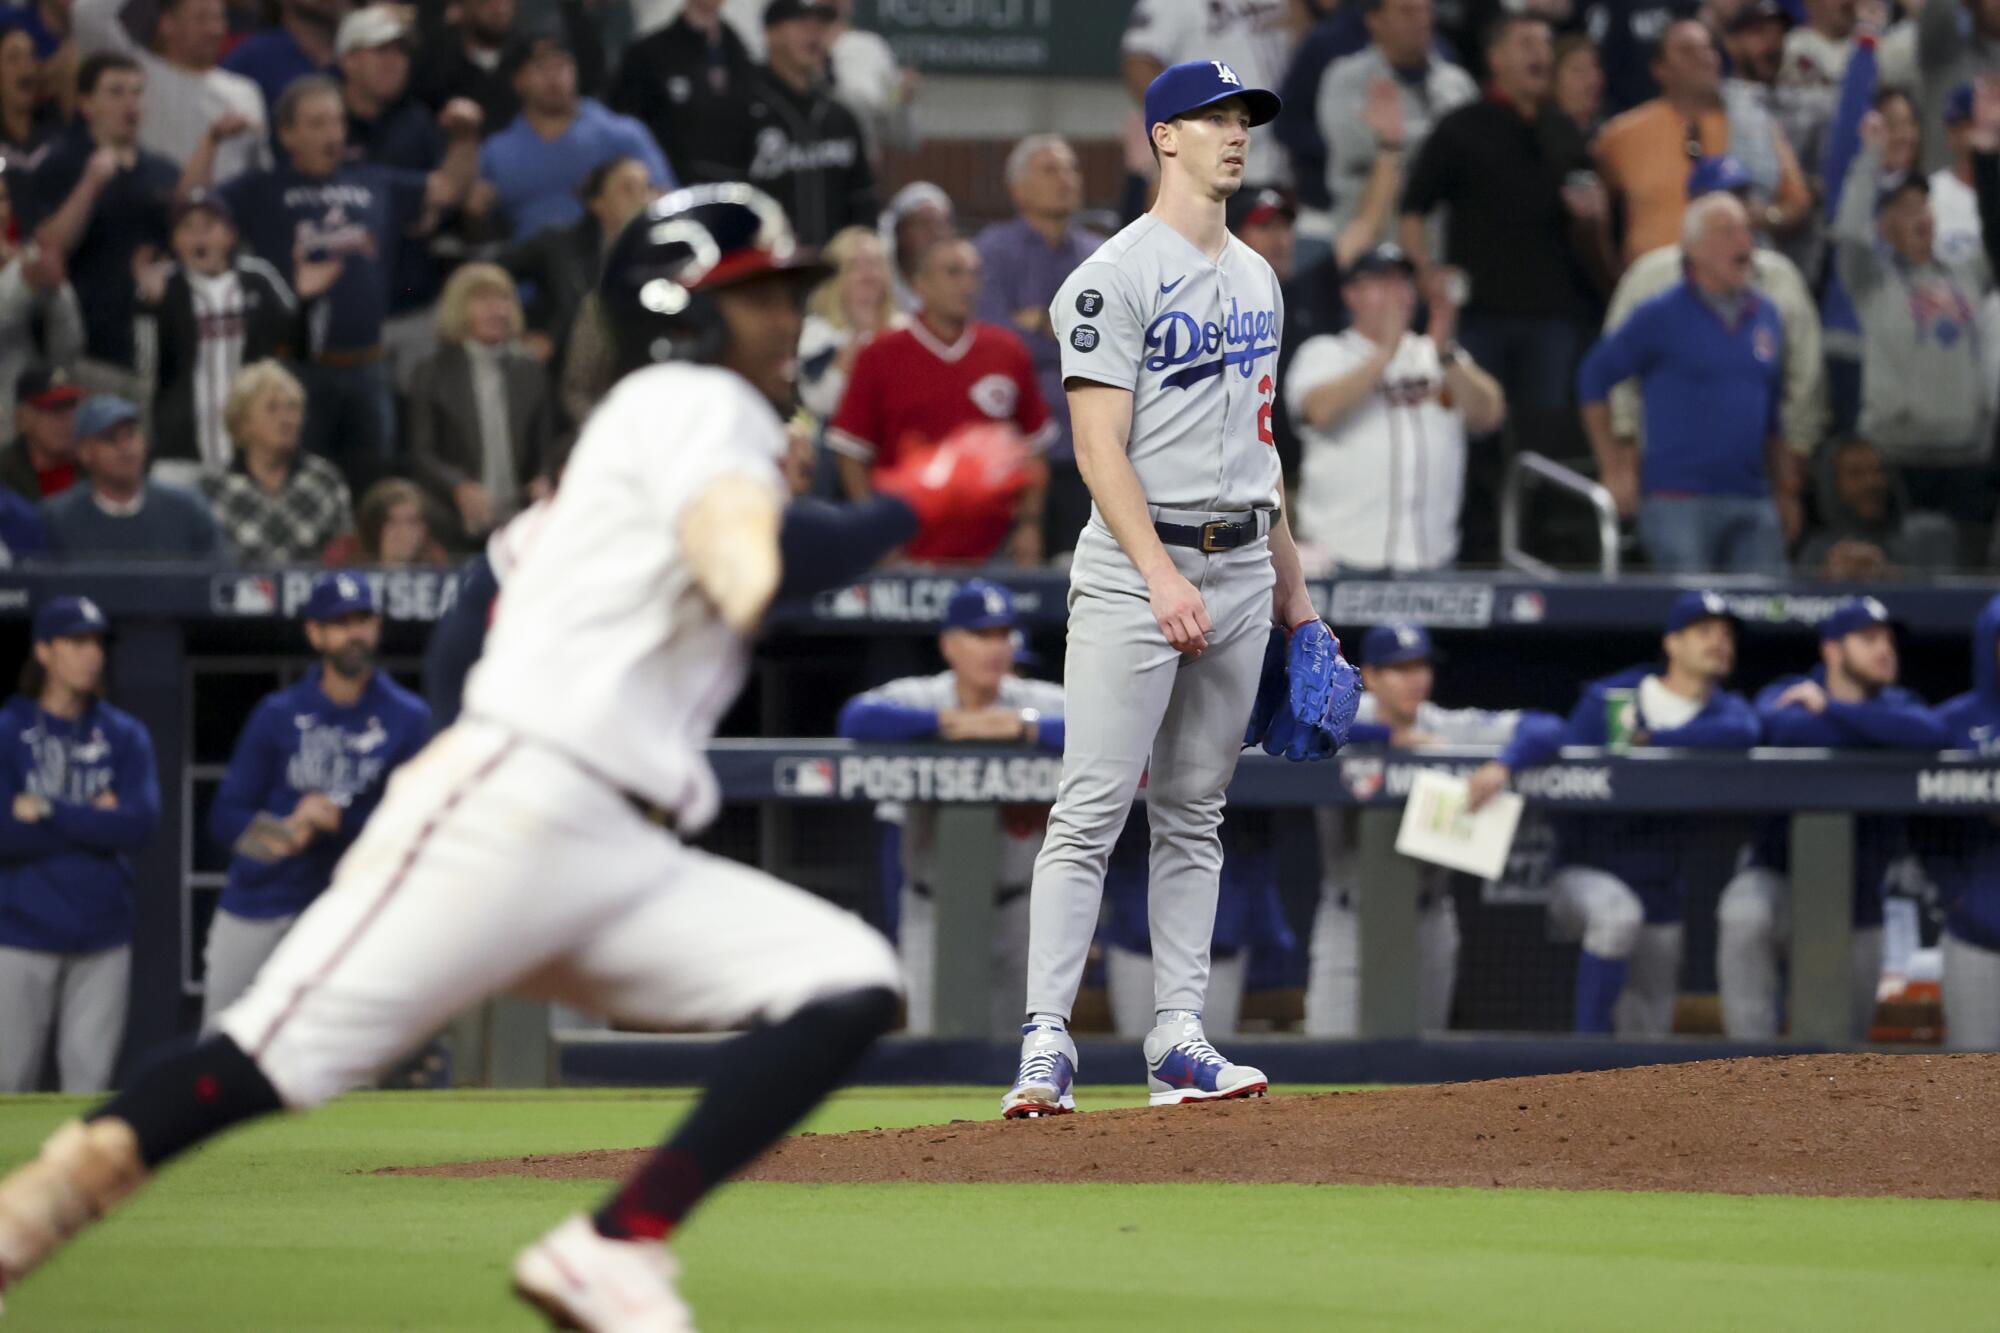 Dodgers starting pitcher Walker Buehler, right, looks up after a hit by Braves' Ozzie Albies.